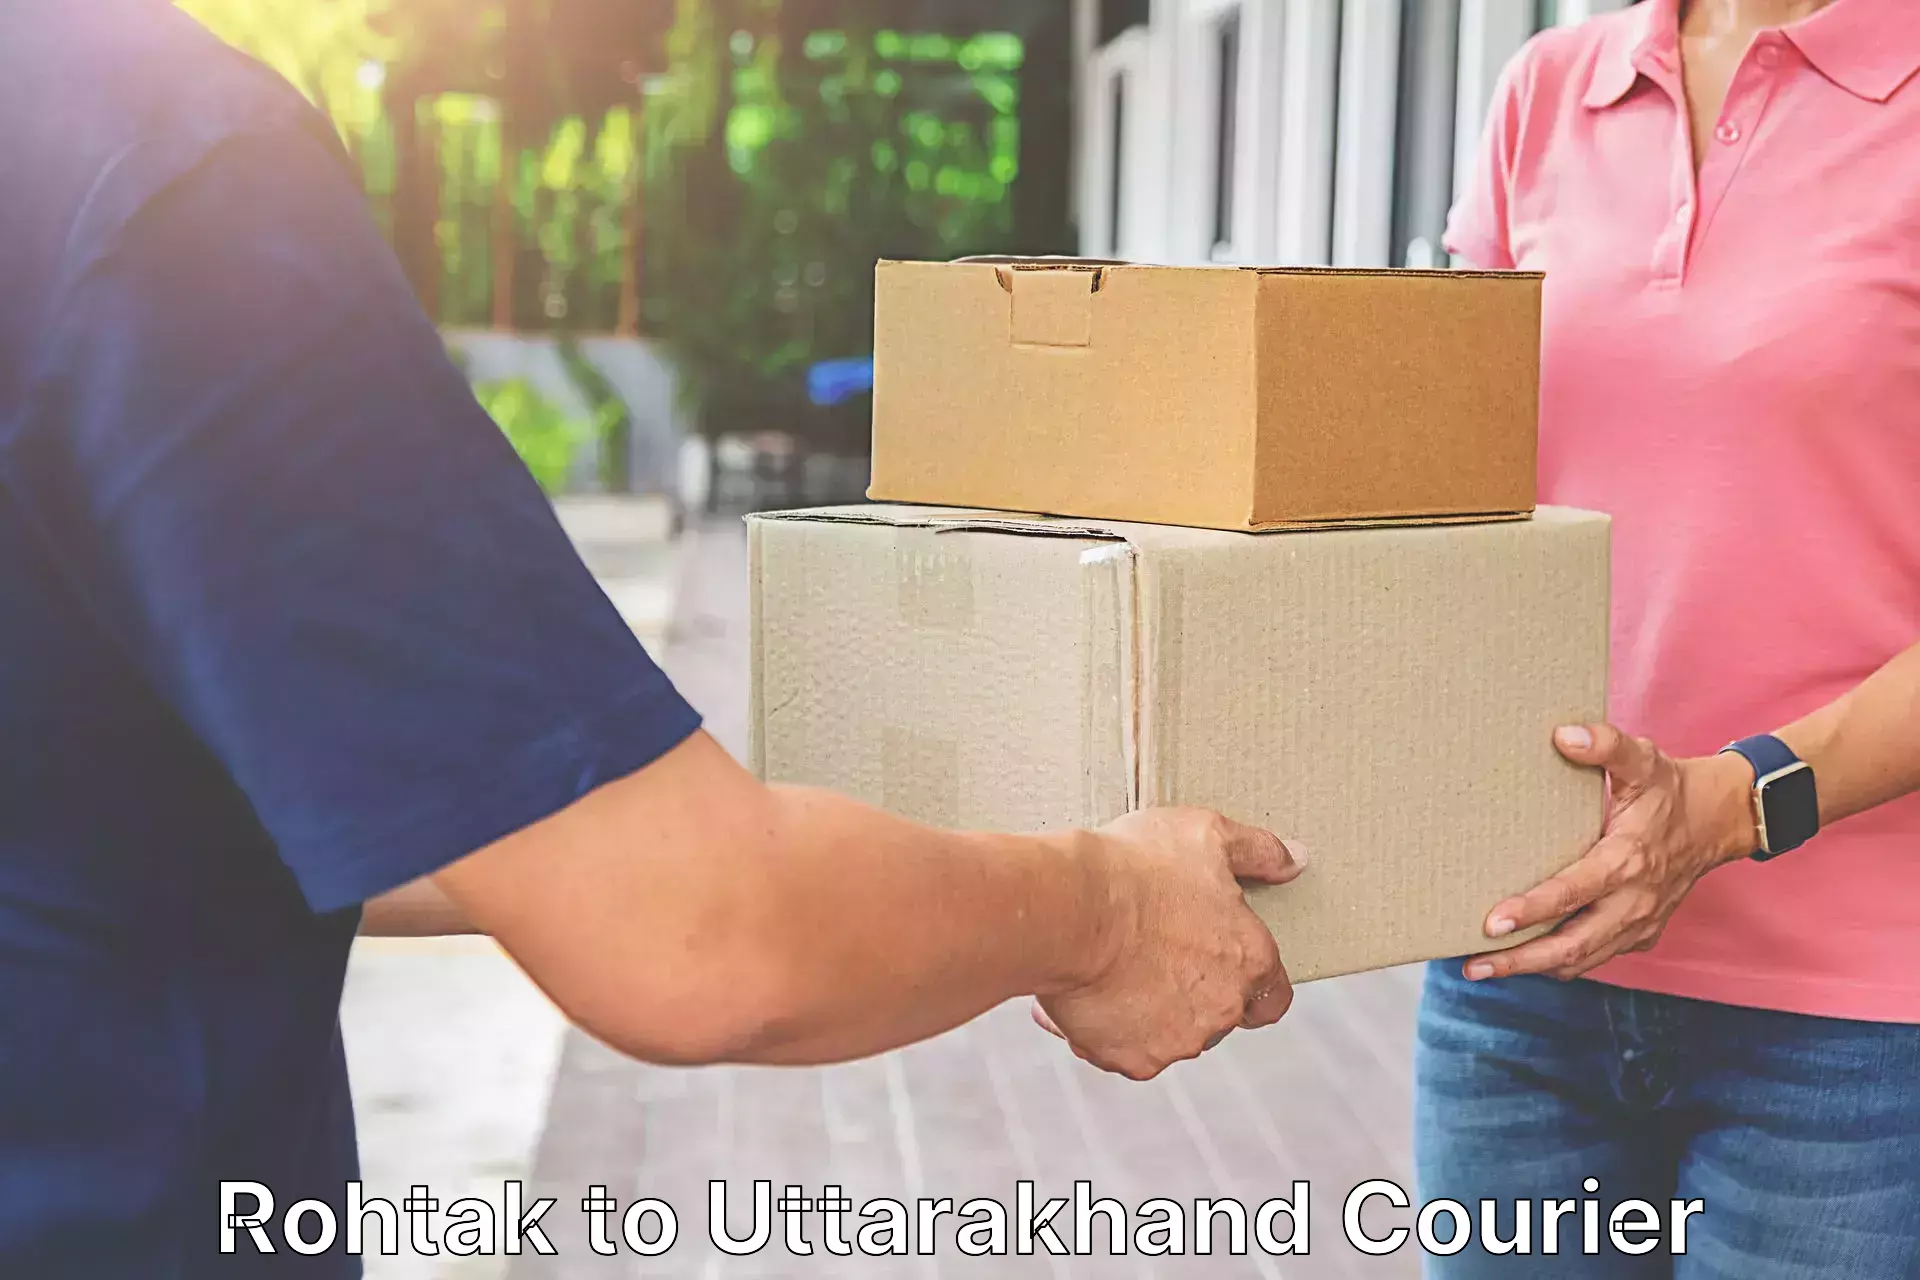 Global courier networks Rohtak to Rishikesh